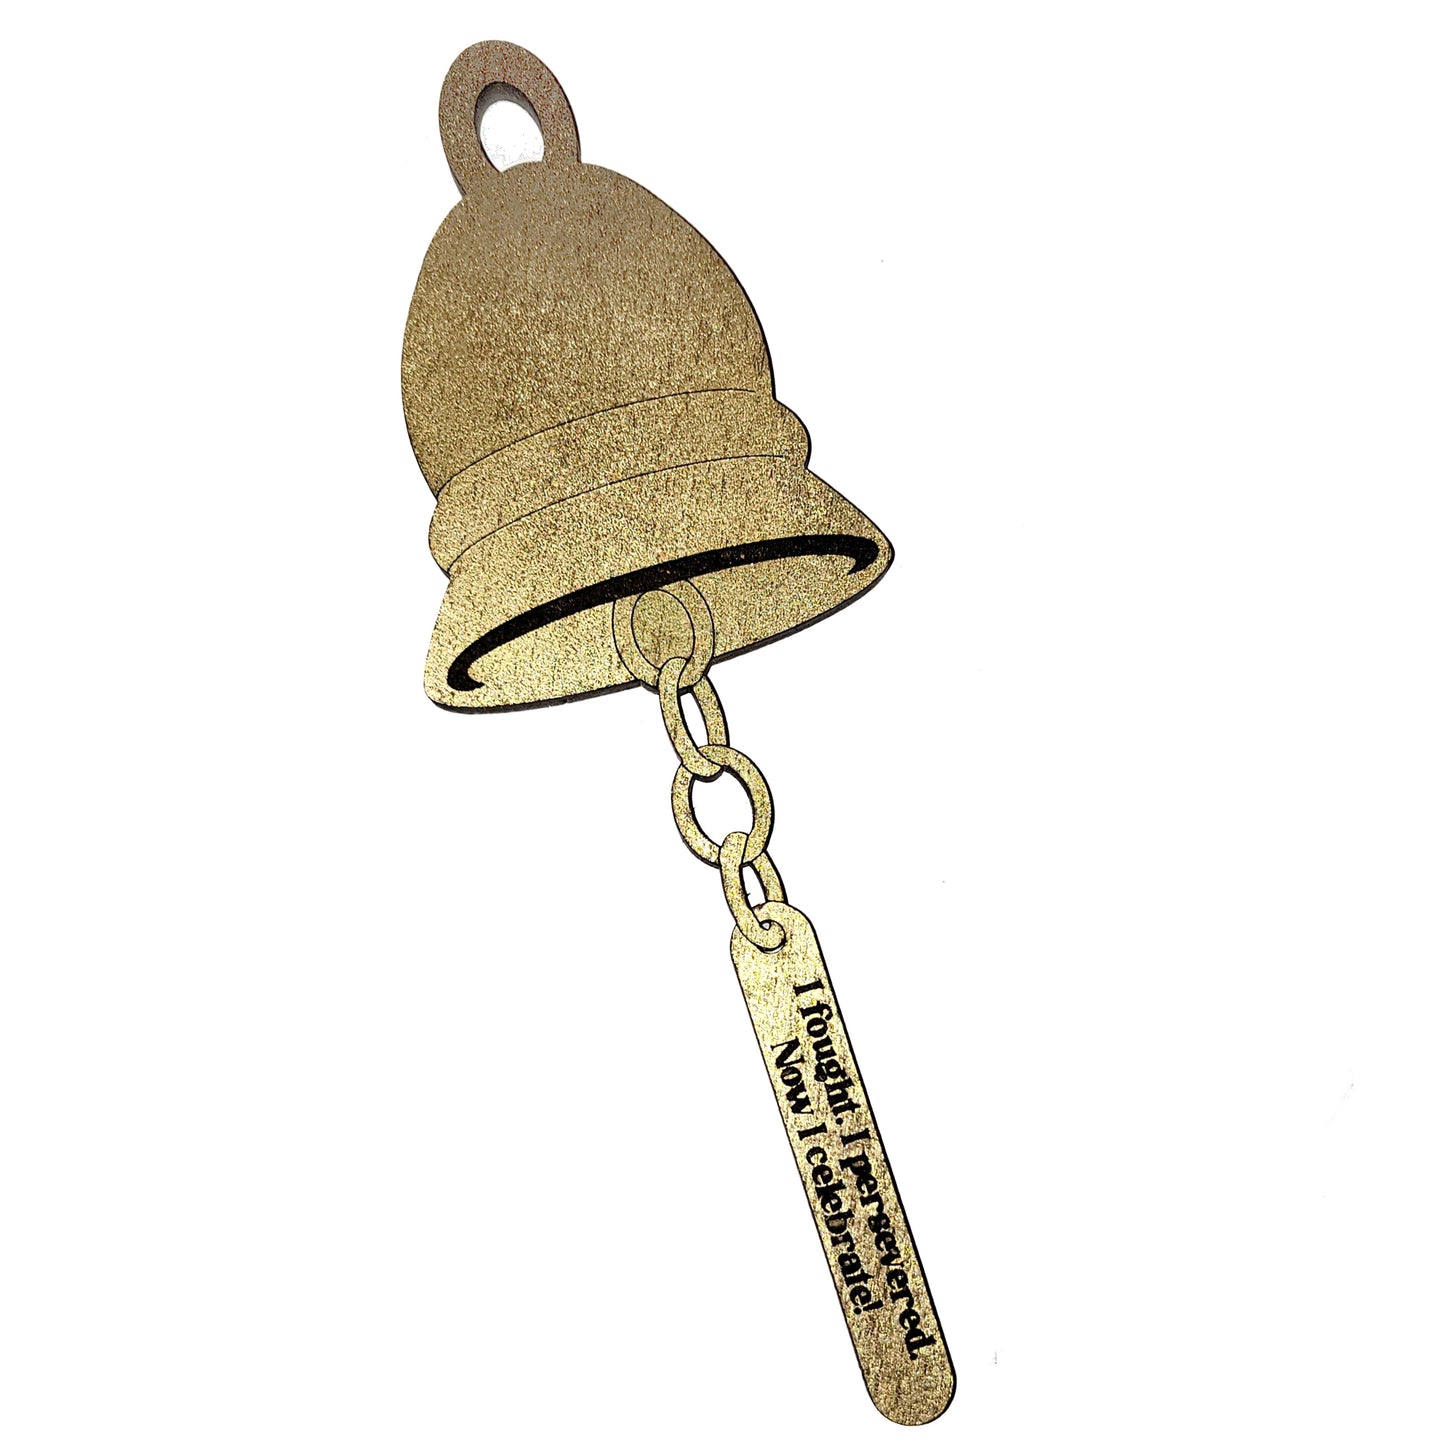 Chemo Bell / Cancer treatment Bell